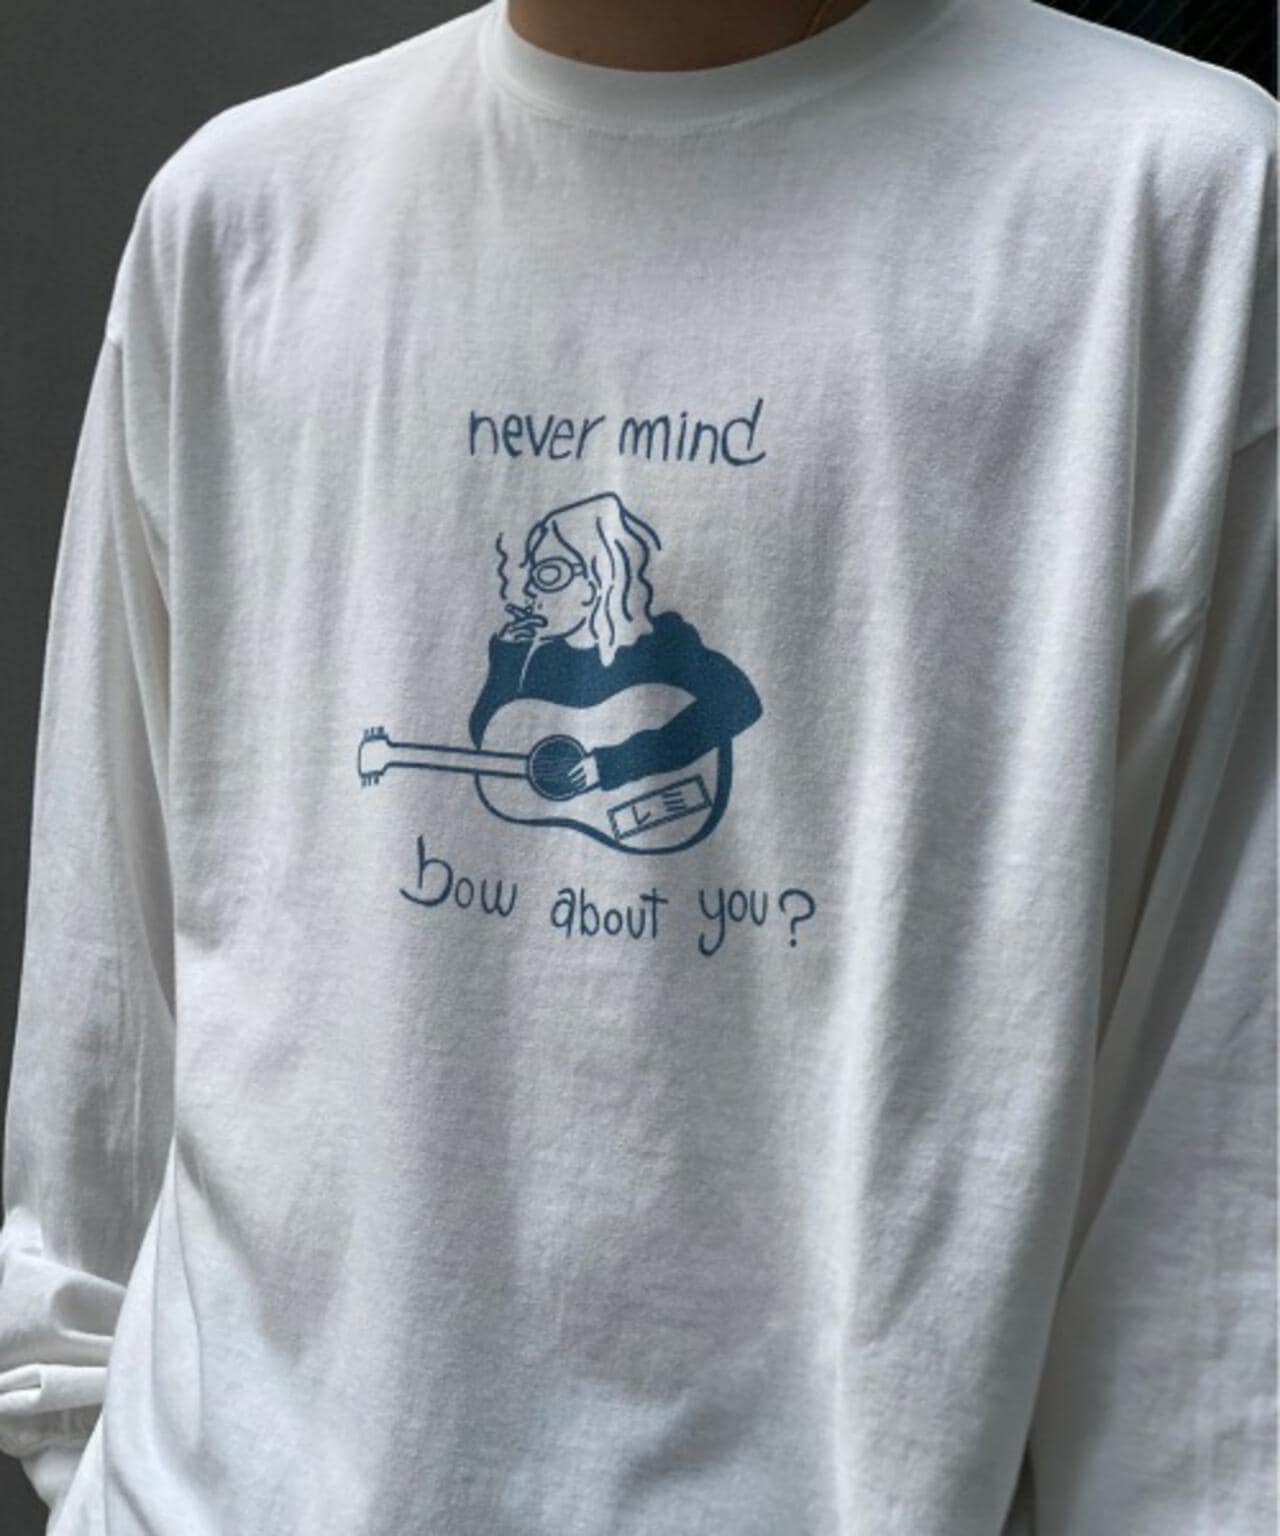 REMI RELIEF/別注LS T-SHIRT(NEVER MIND) | B'2nd ( ビーセカンド